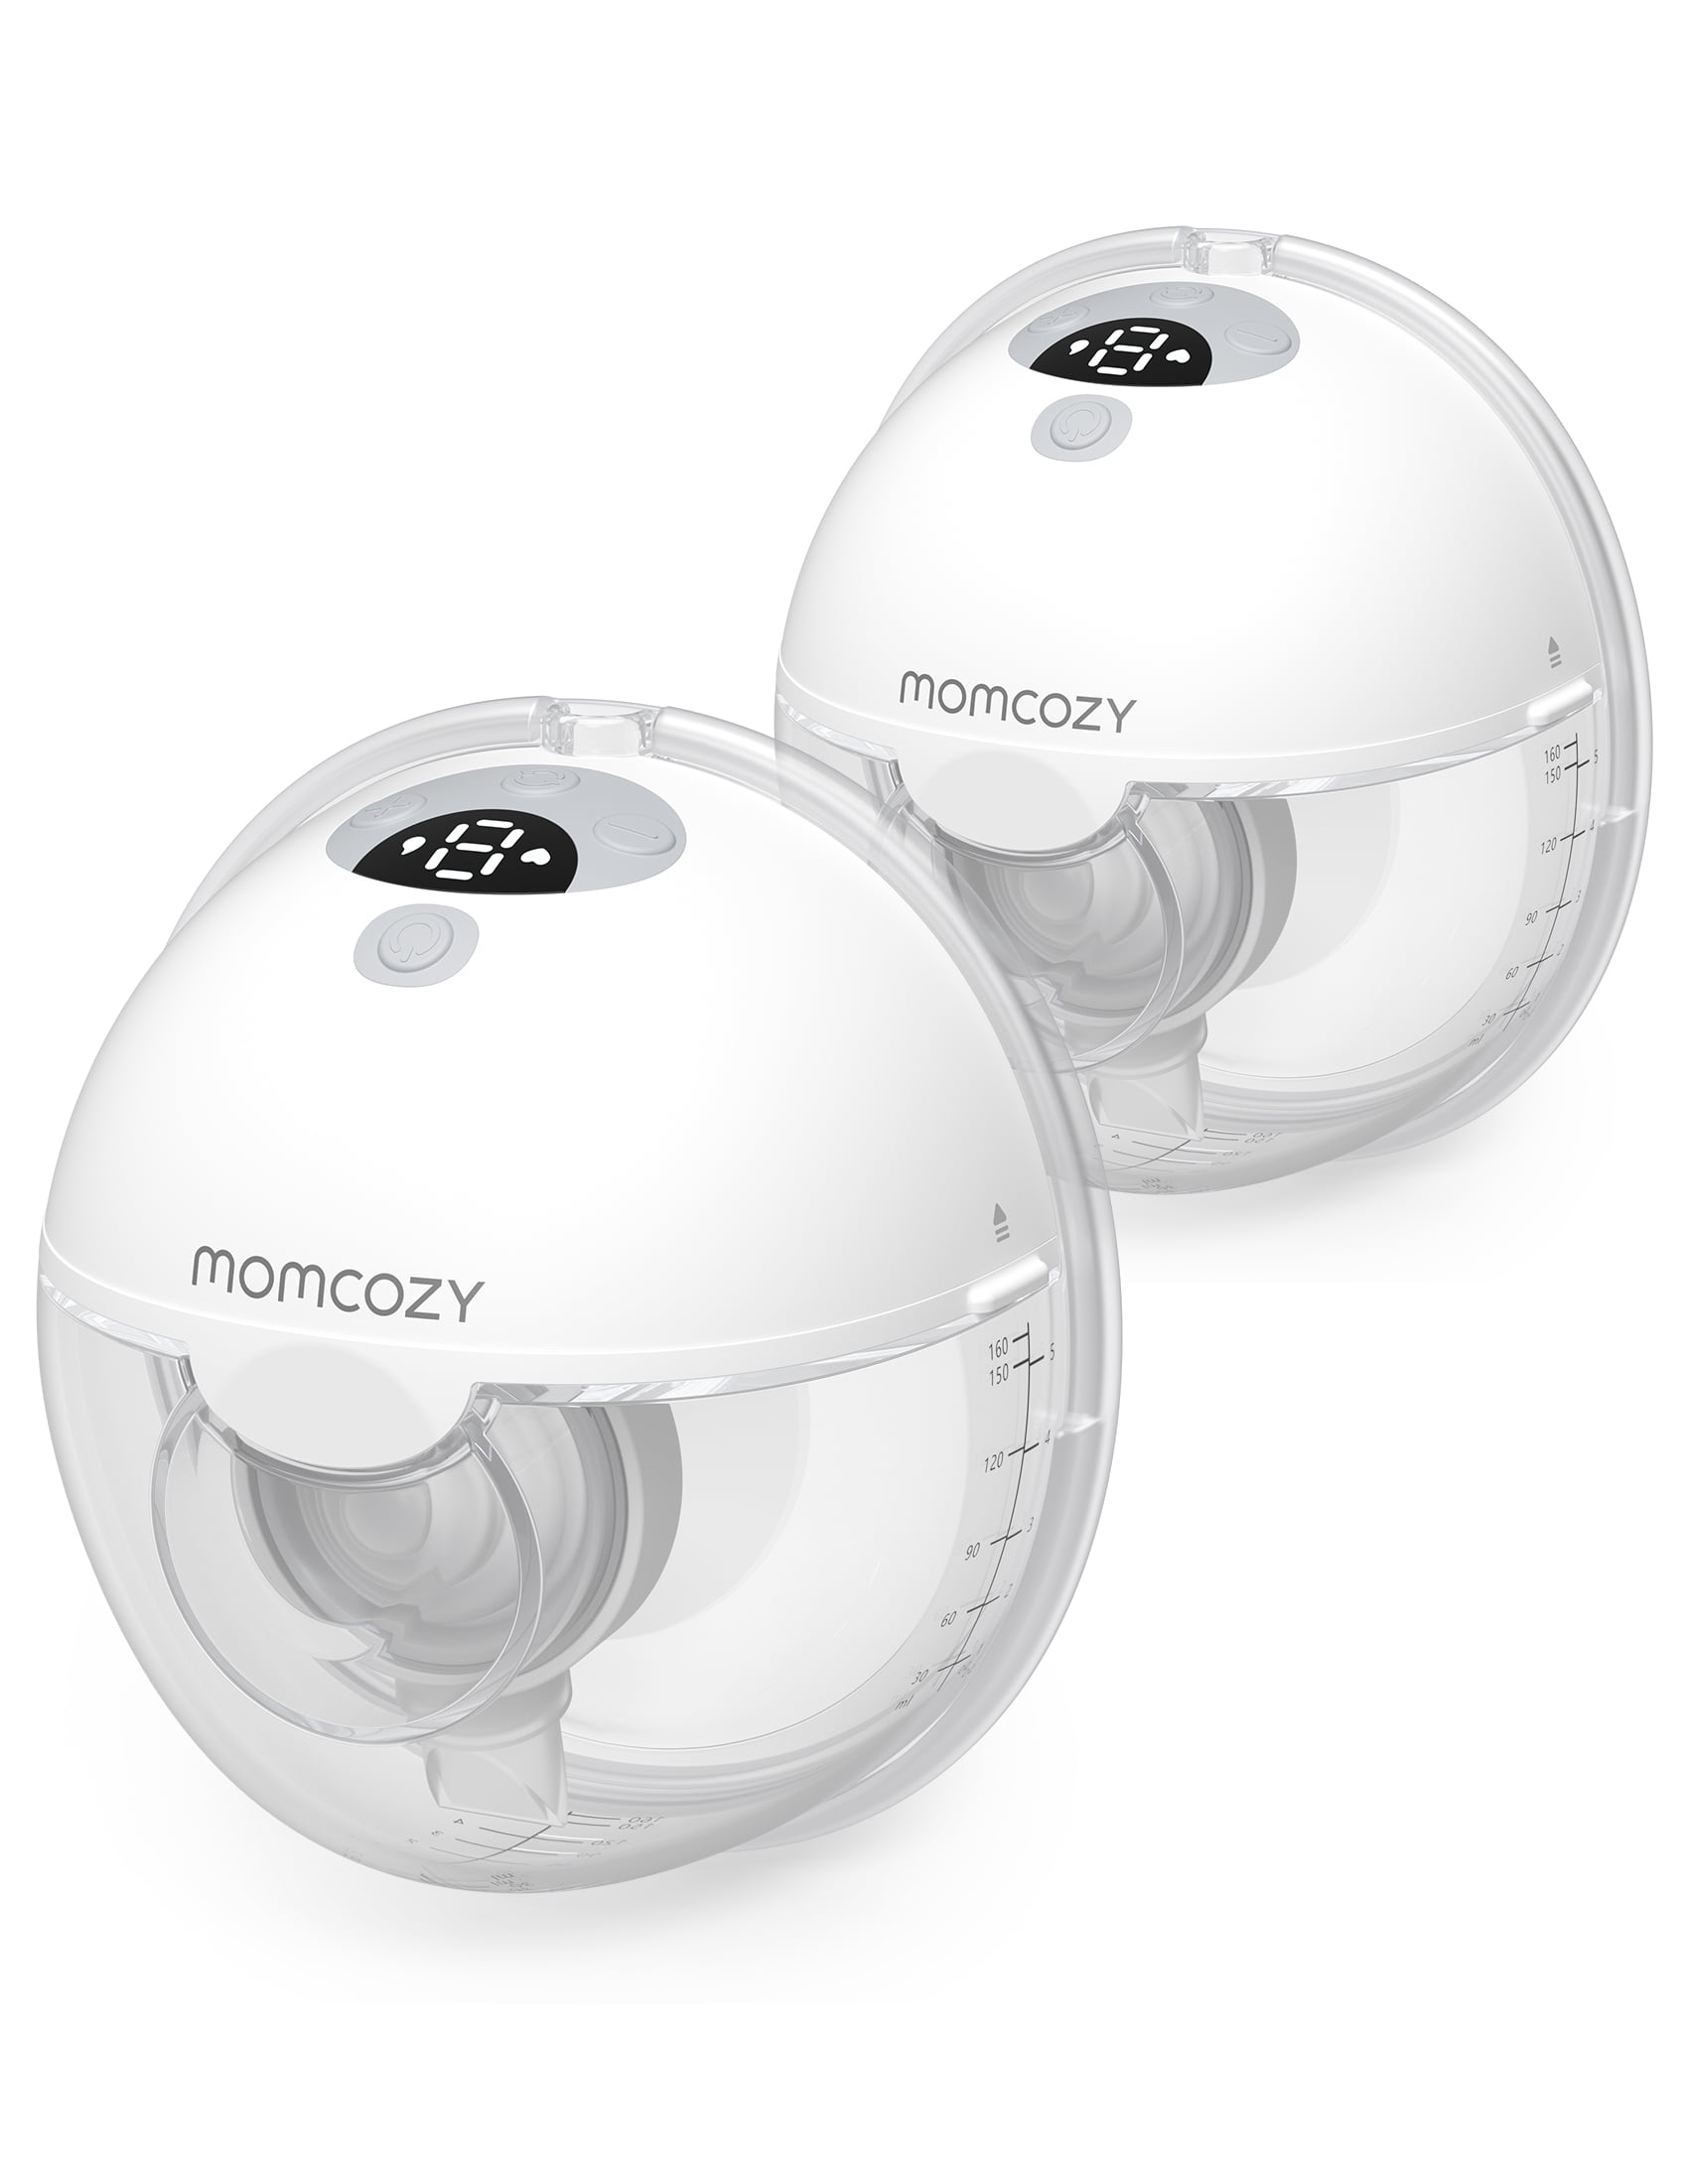 MomCozy M5 Wearable Breast Pumps Grey Two Pumps Hands-Free New Open Box